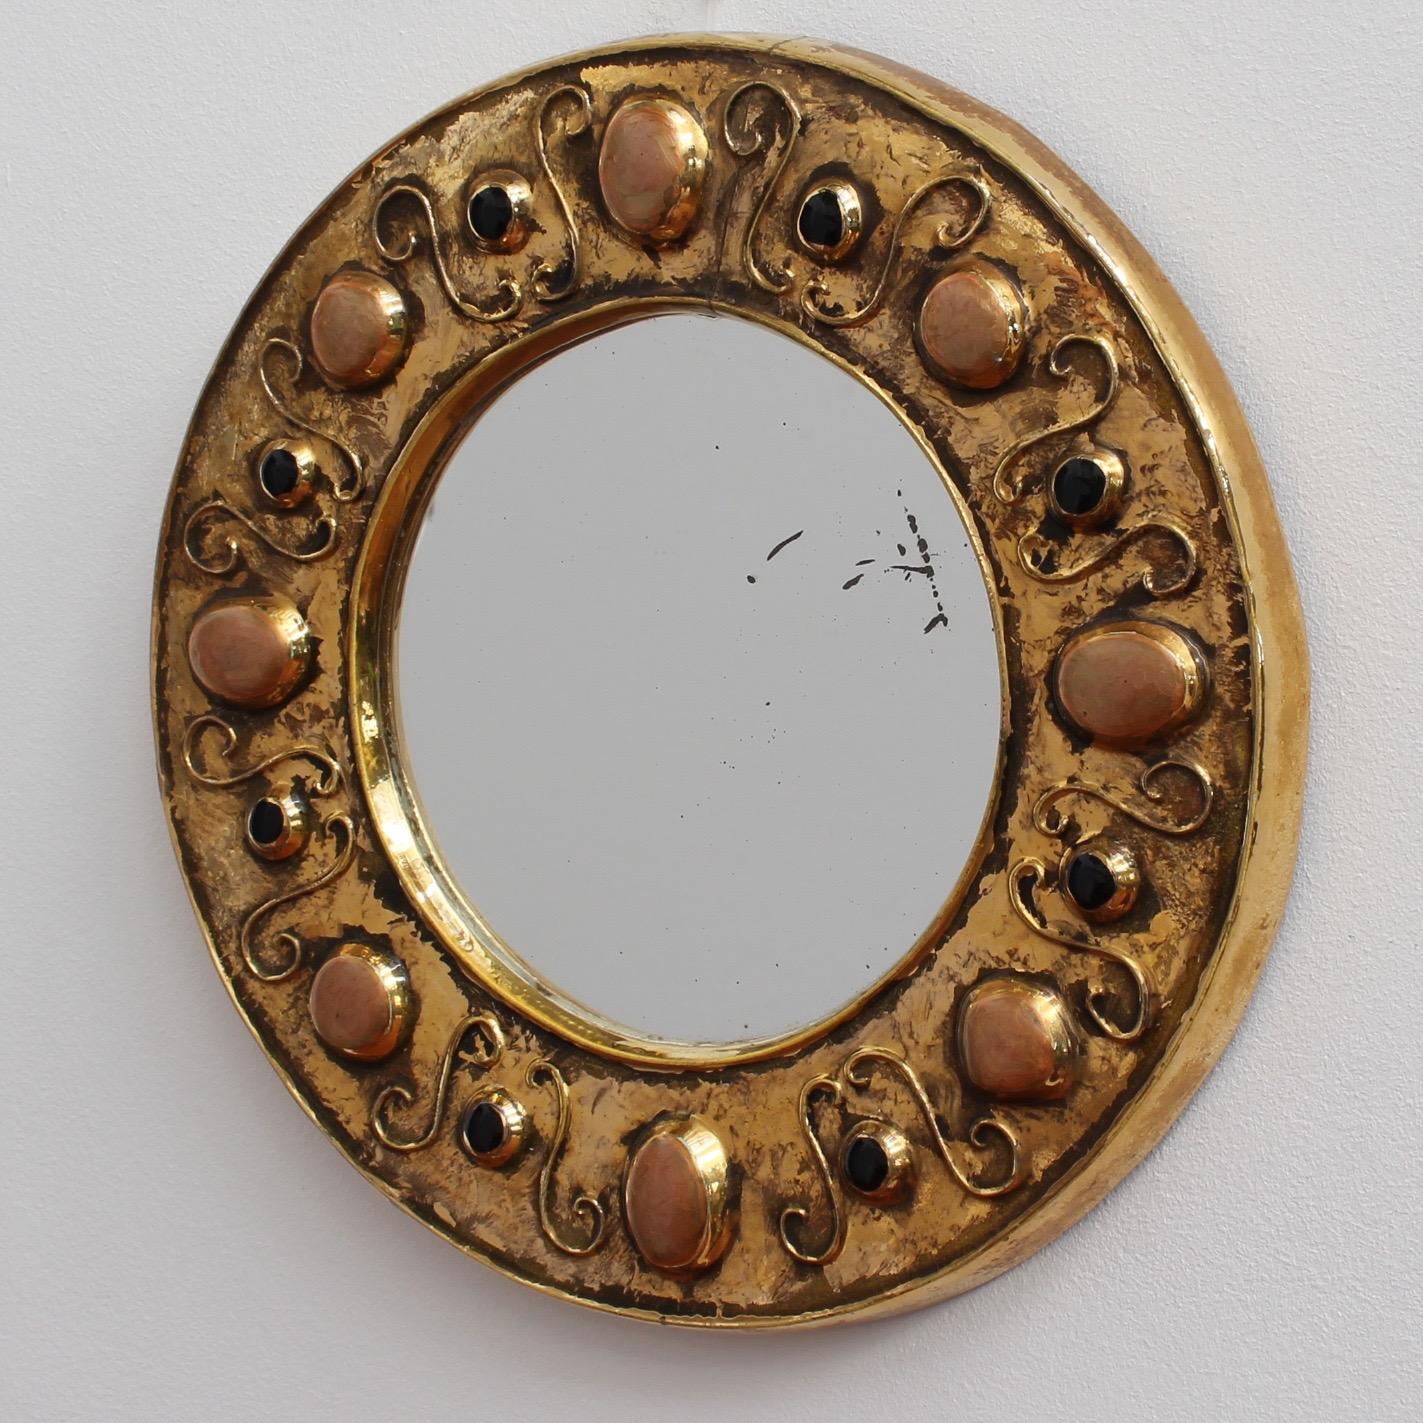 French Gilded Ceramic Decorative Wall Mirror by François Lembo, circa 1960s-1970s